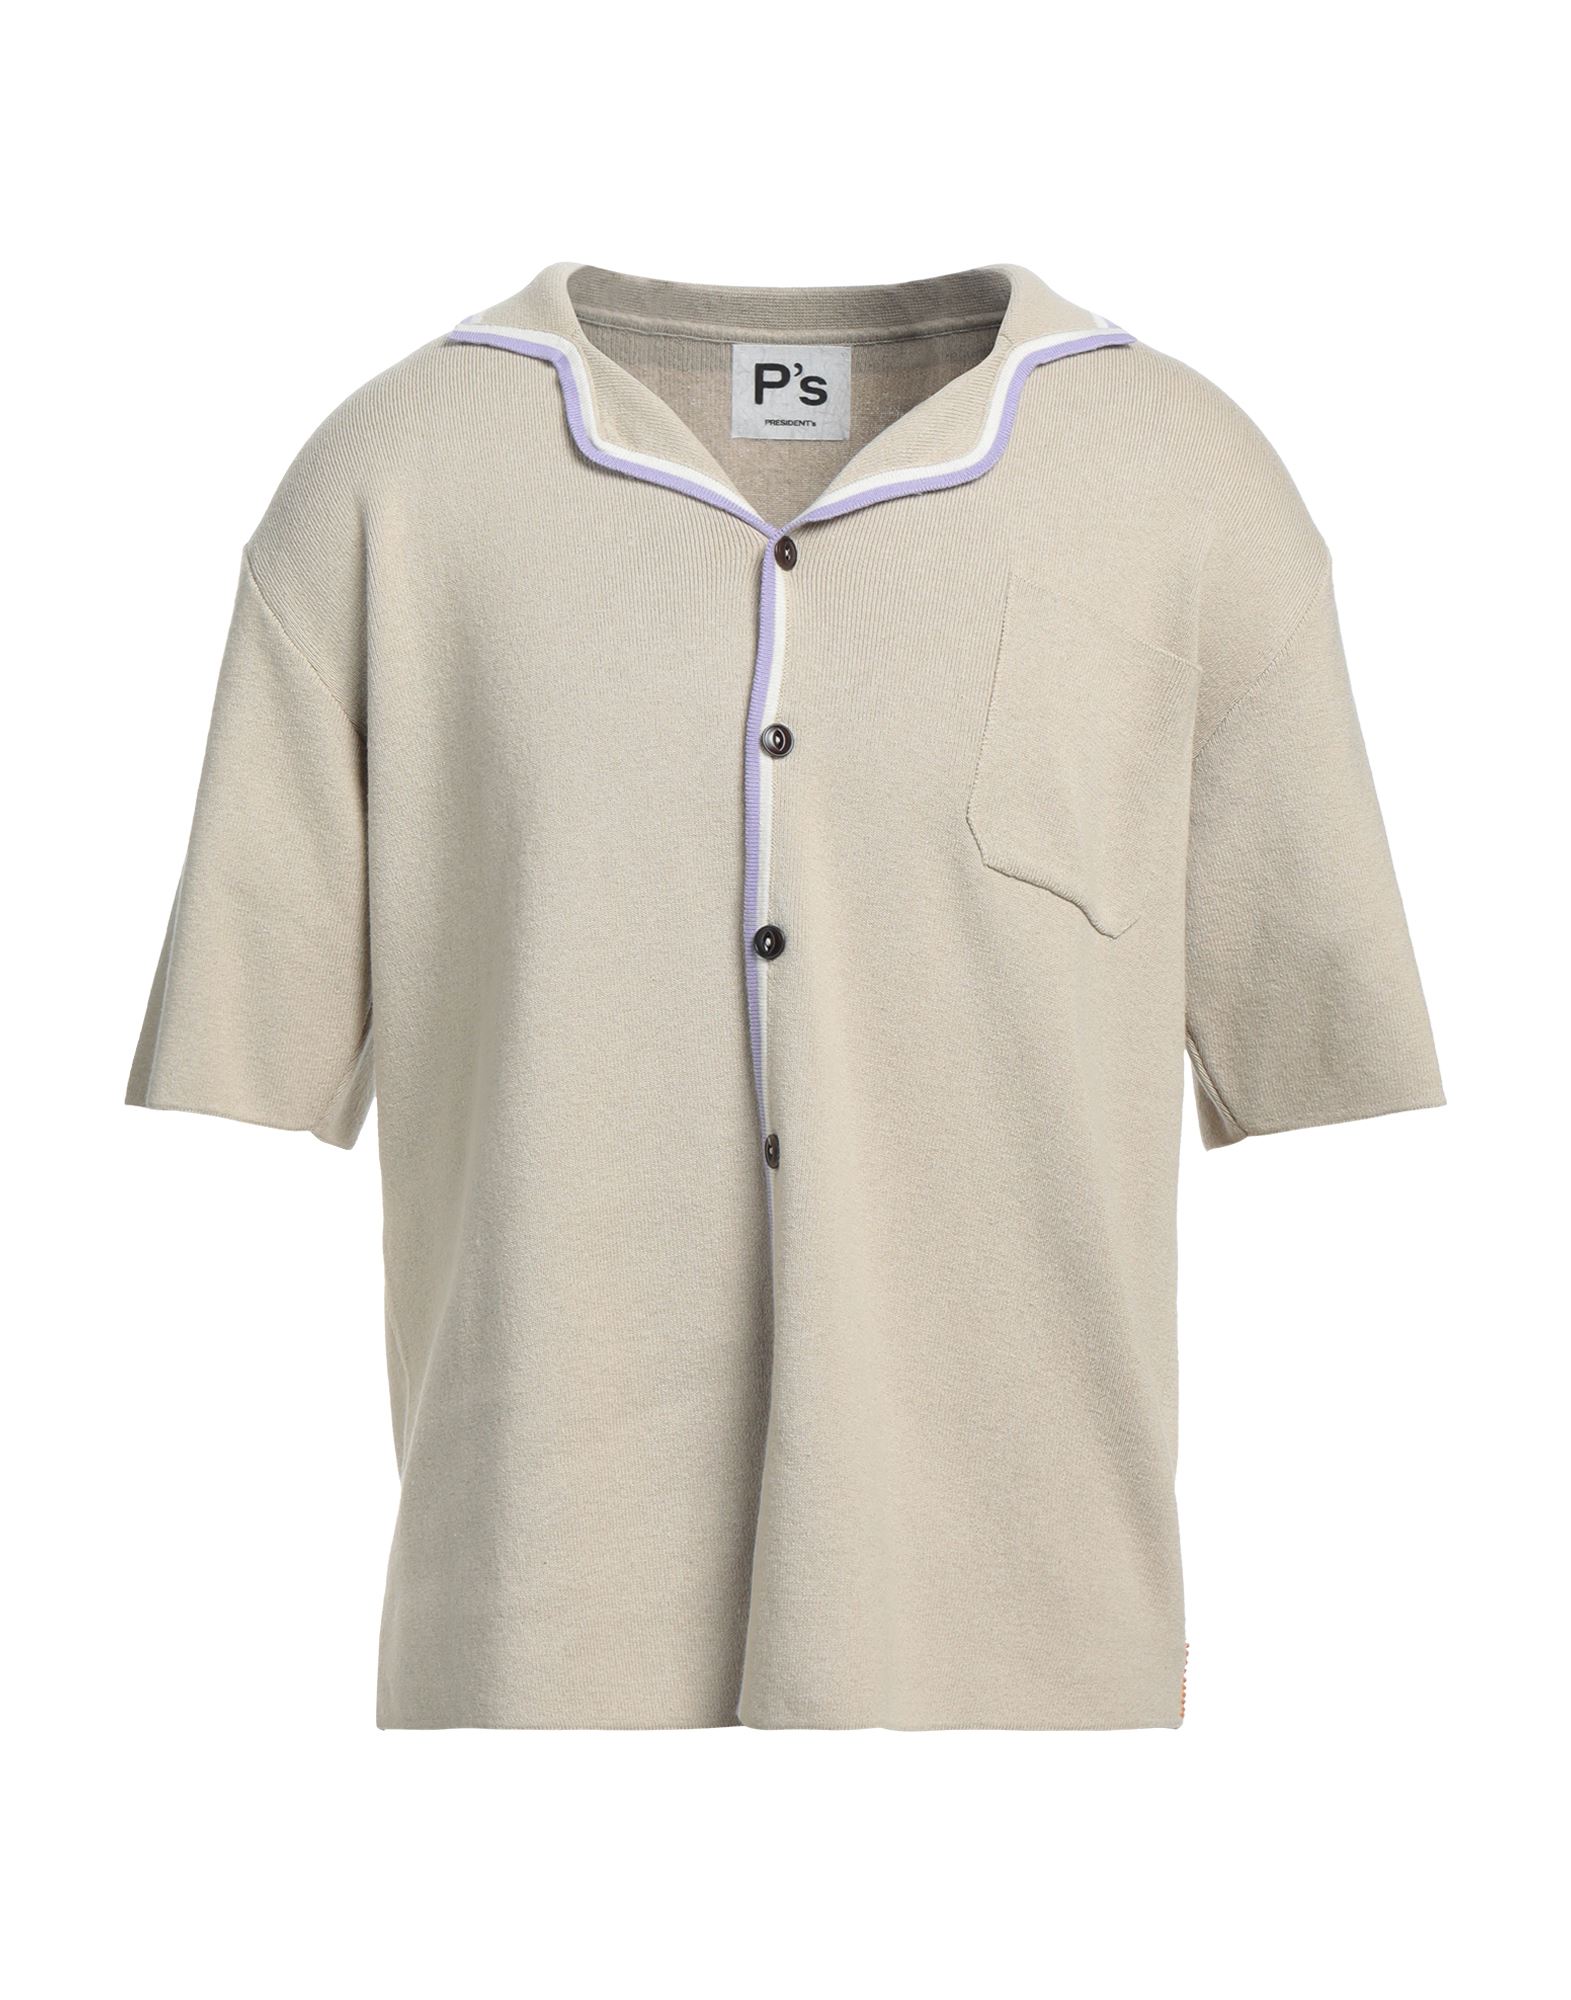 President's Shirts In Beige